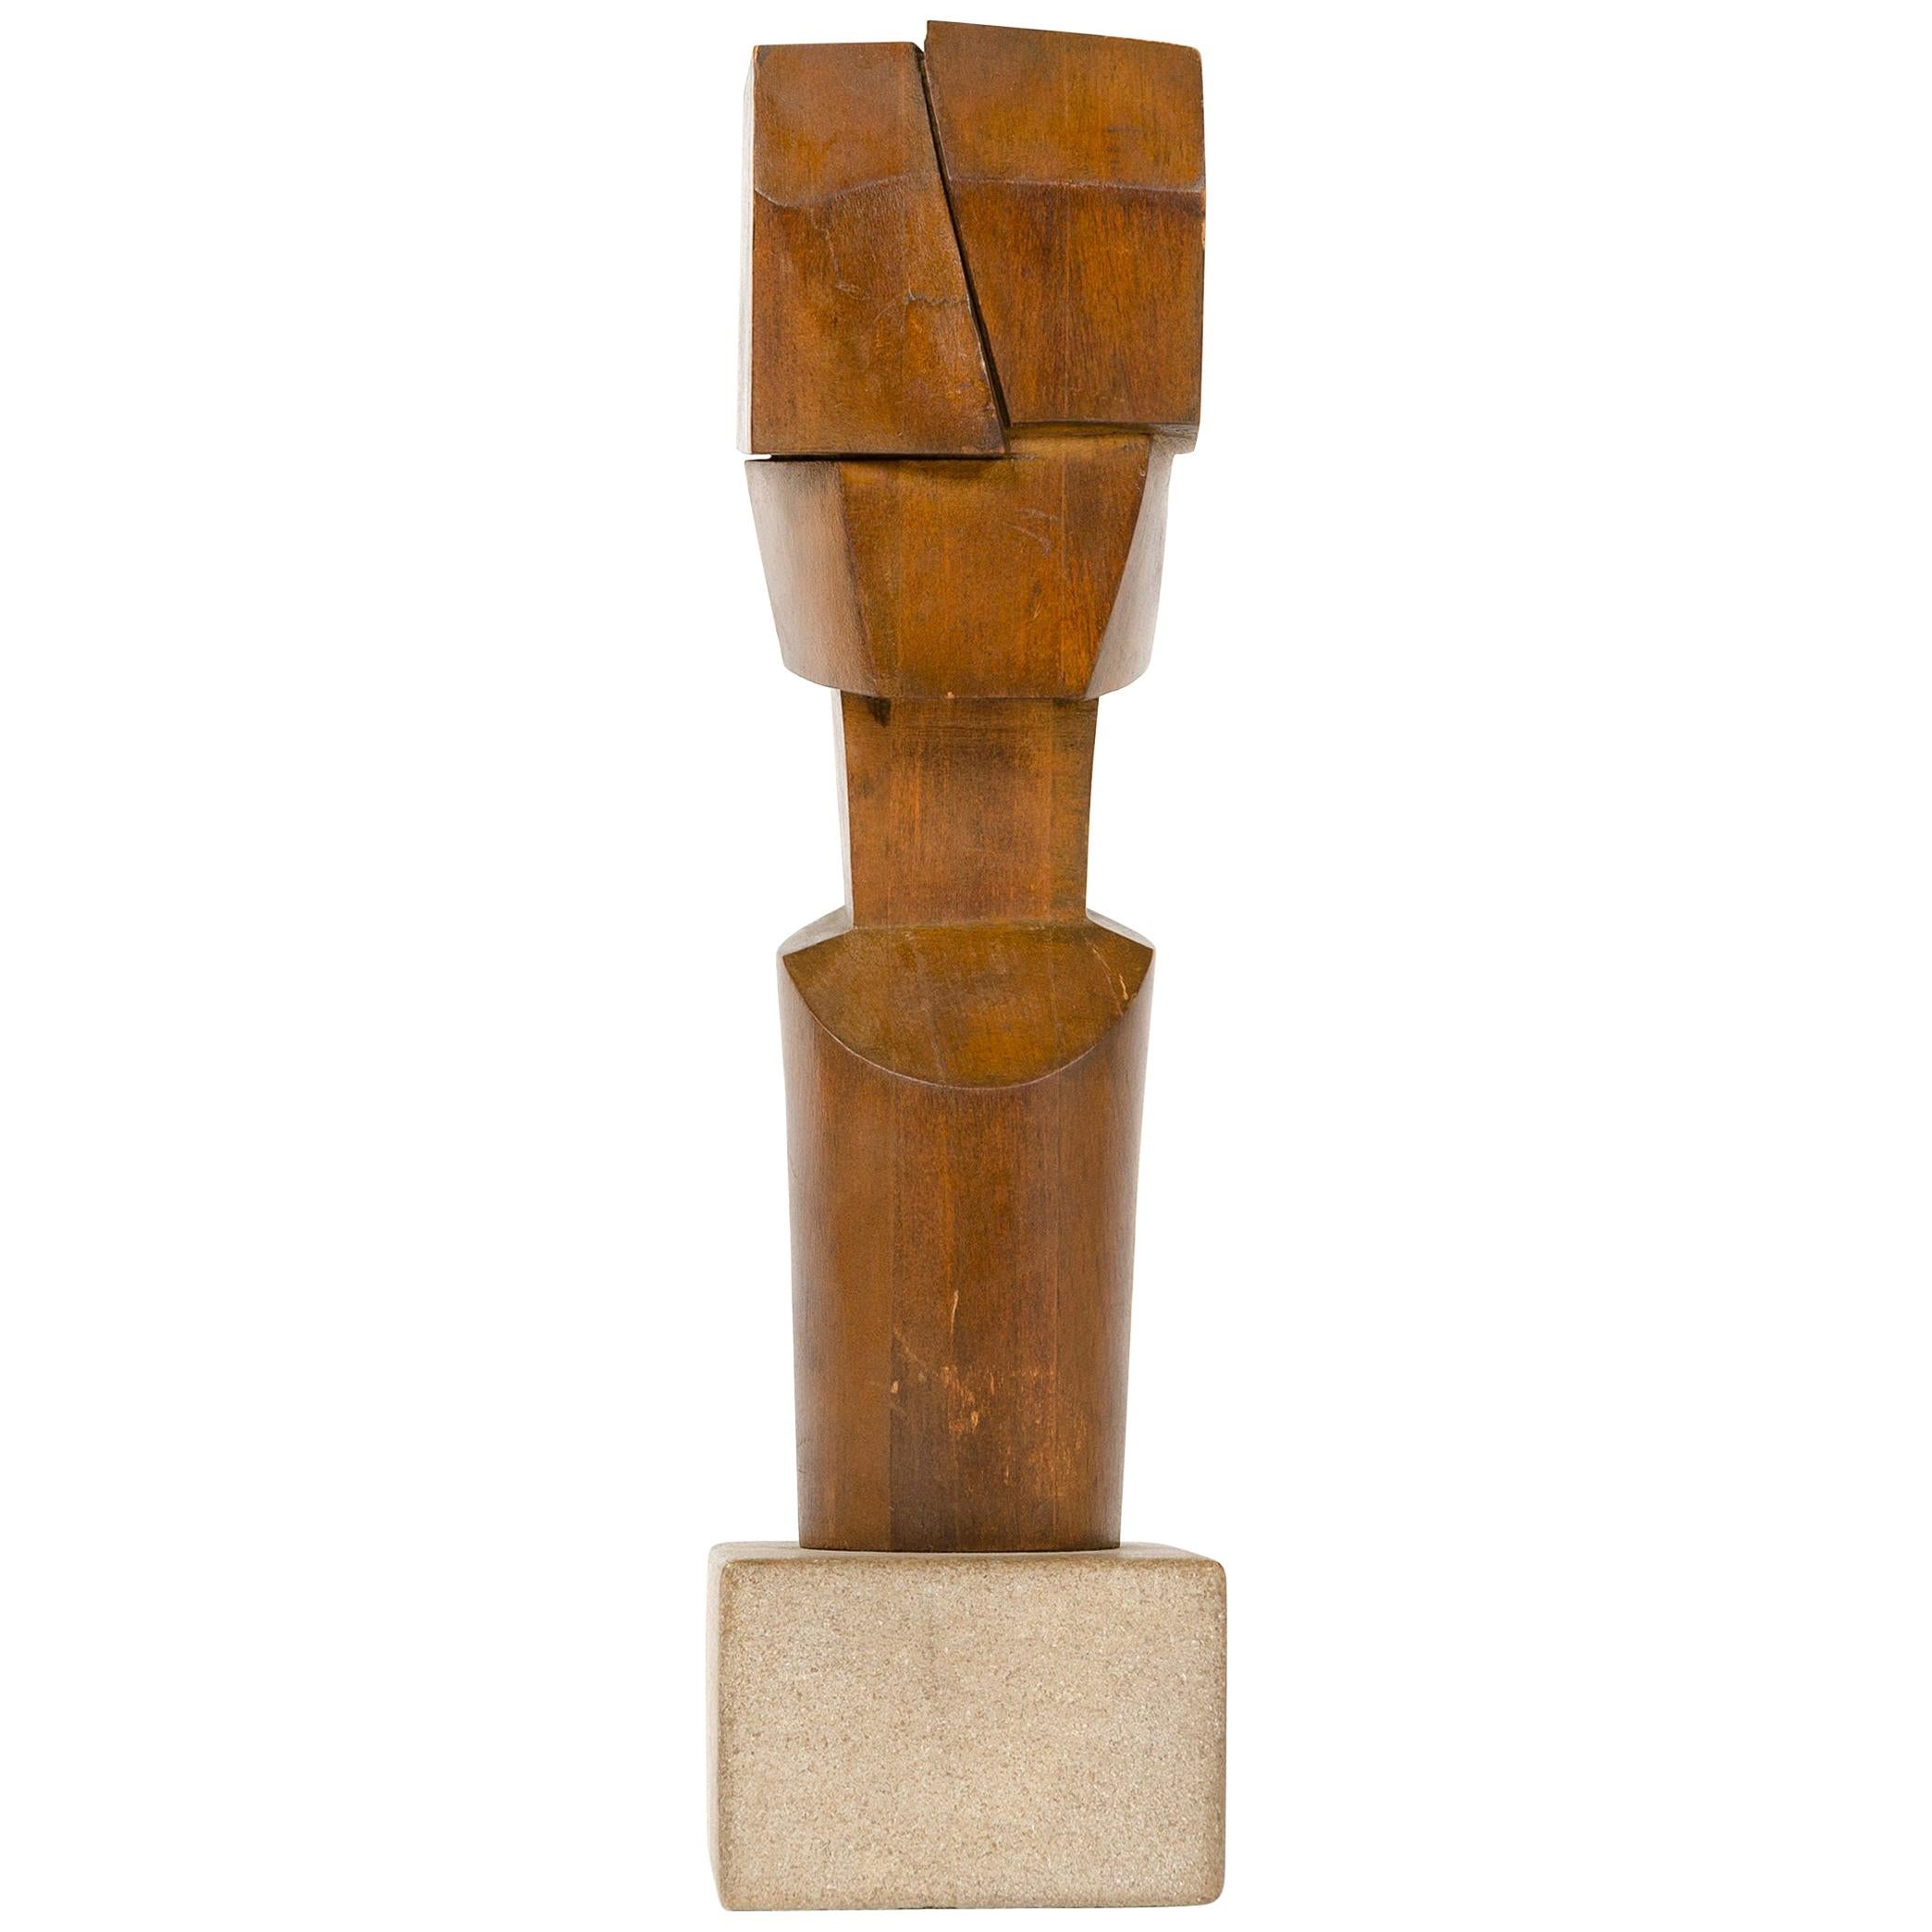 1970s American Abstract Sculptural Bust by William Sildar